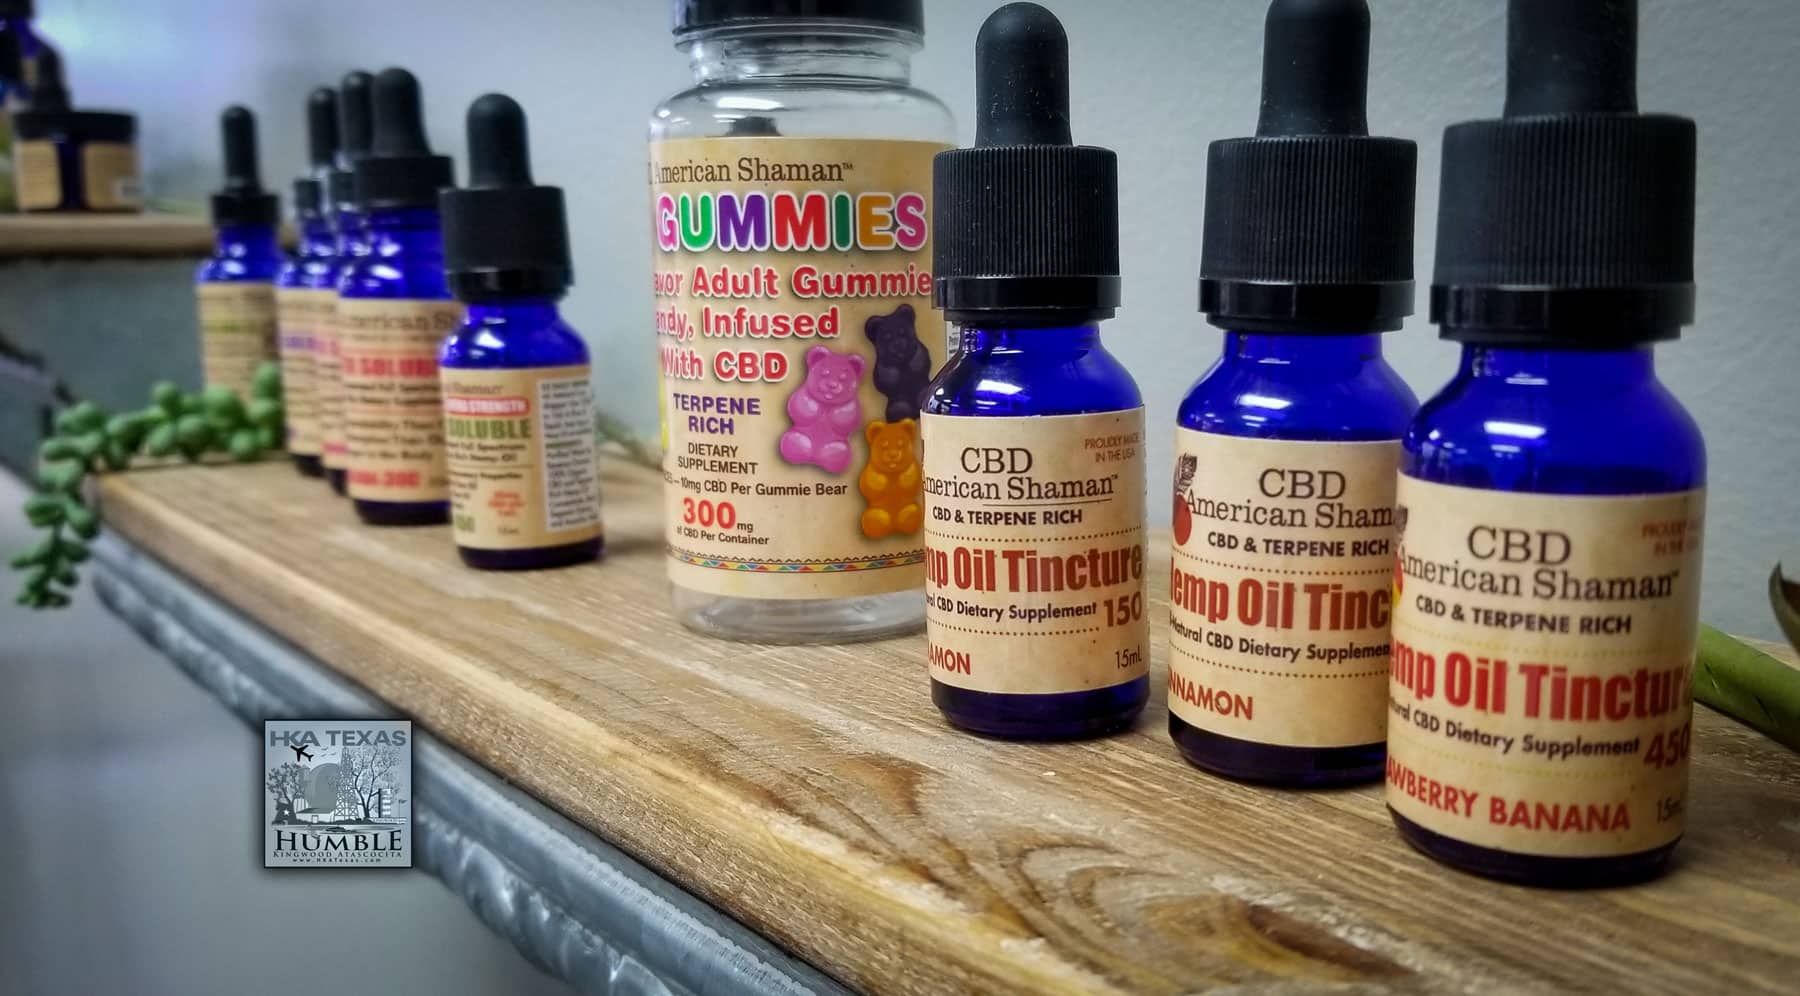 A NEW CBD Oil Franchise is now open in Humble, Texas